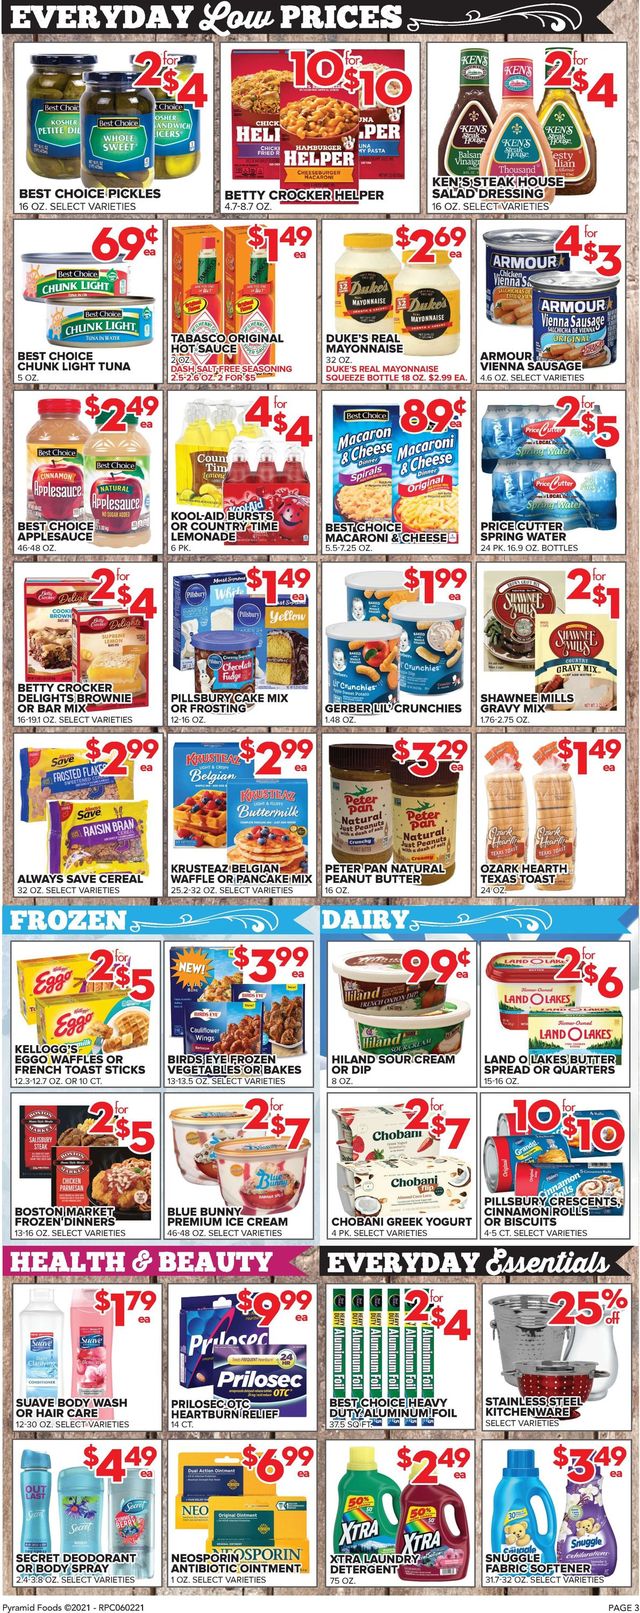 Price Cutter Ad from 06/02/2021